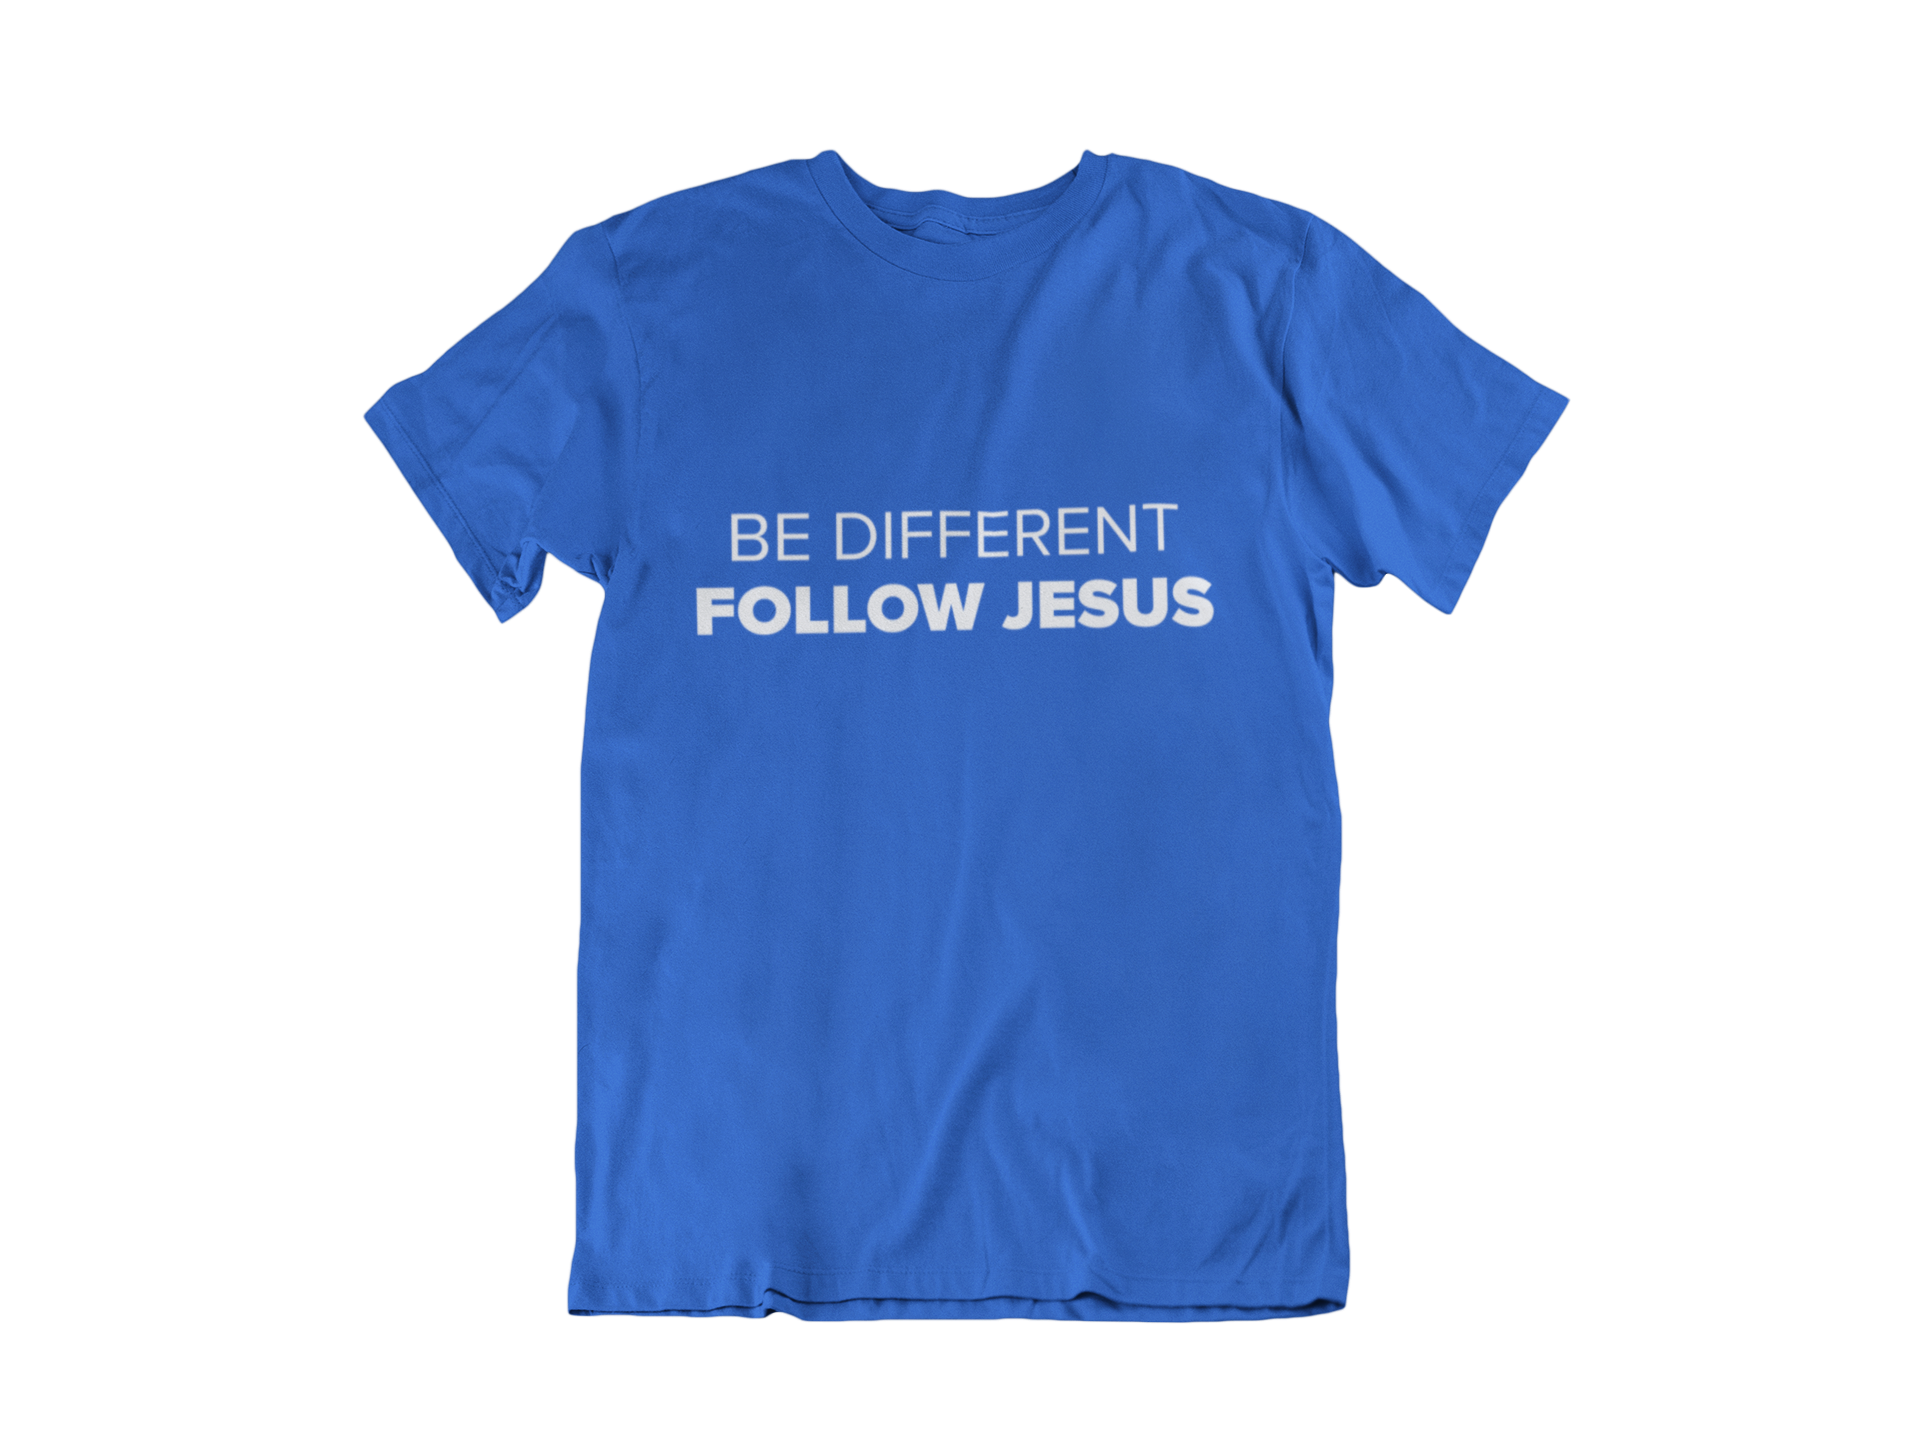 BE DIFFERENT FOLLOW JESUS BLUE - CHRISTIAN CLOTHING